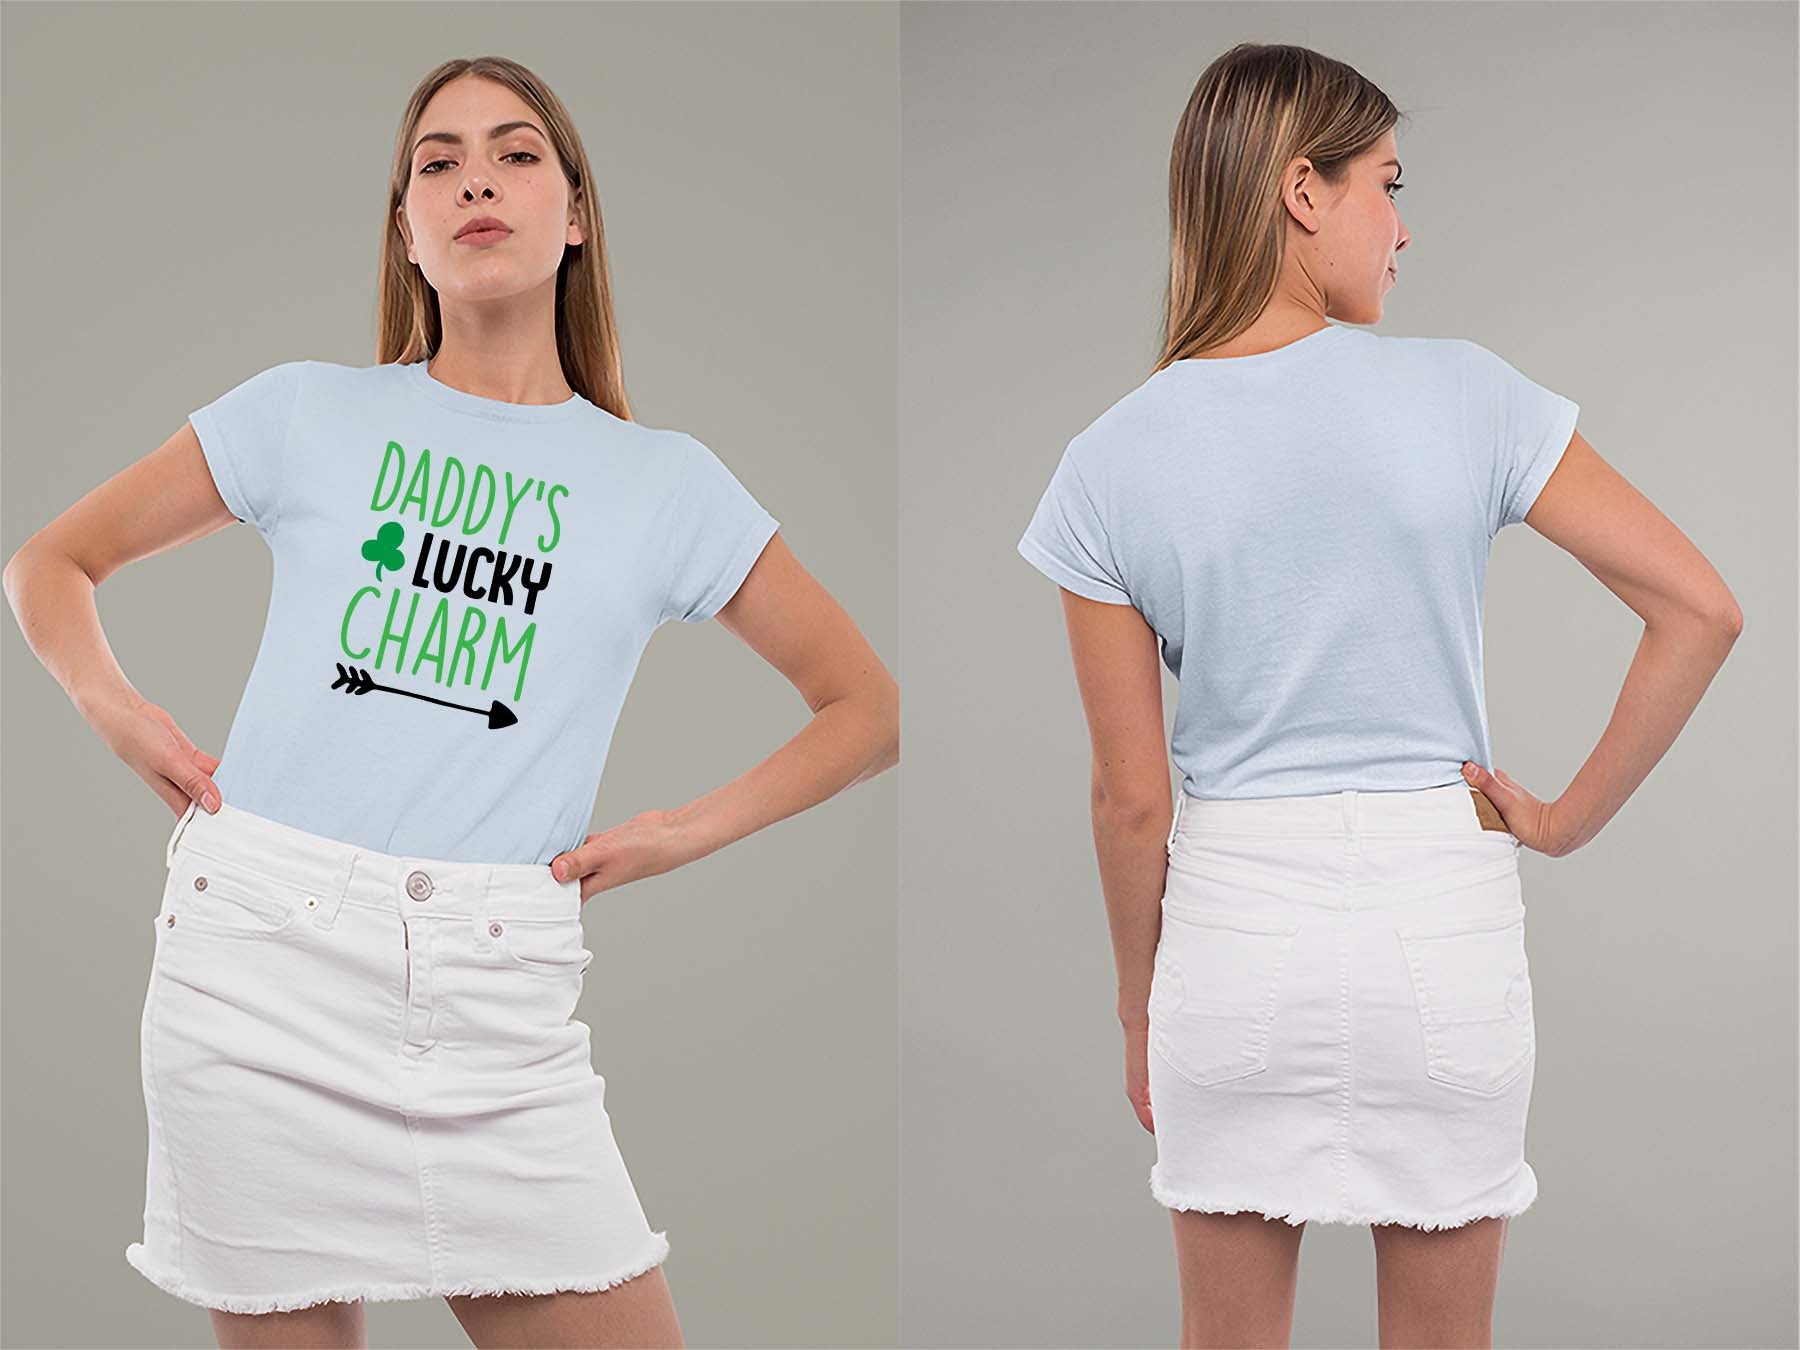 Fat Dave Daddy's Lucky Charm Ladies Crew (Round) Neck Shirt Small Light Blue